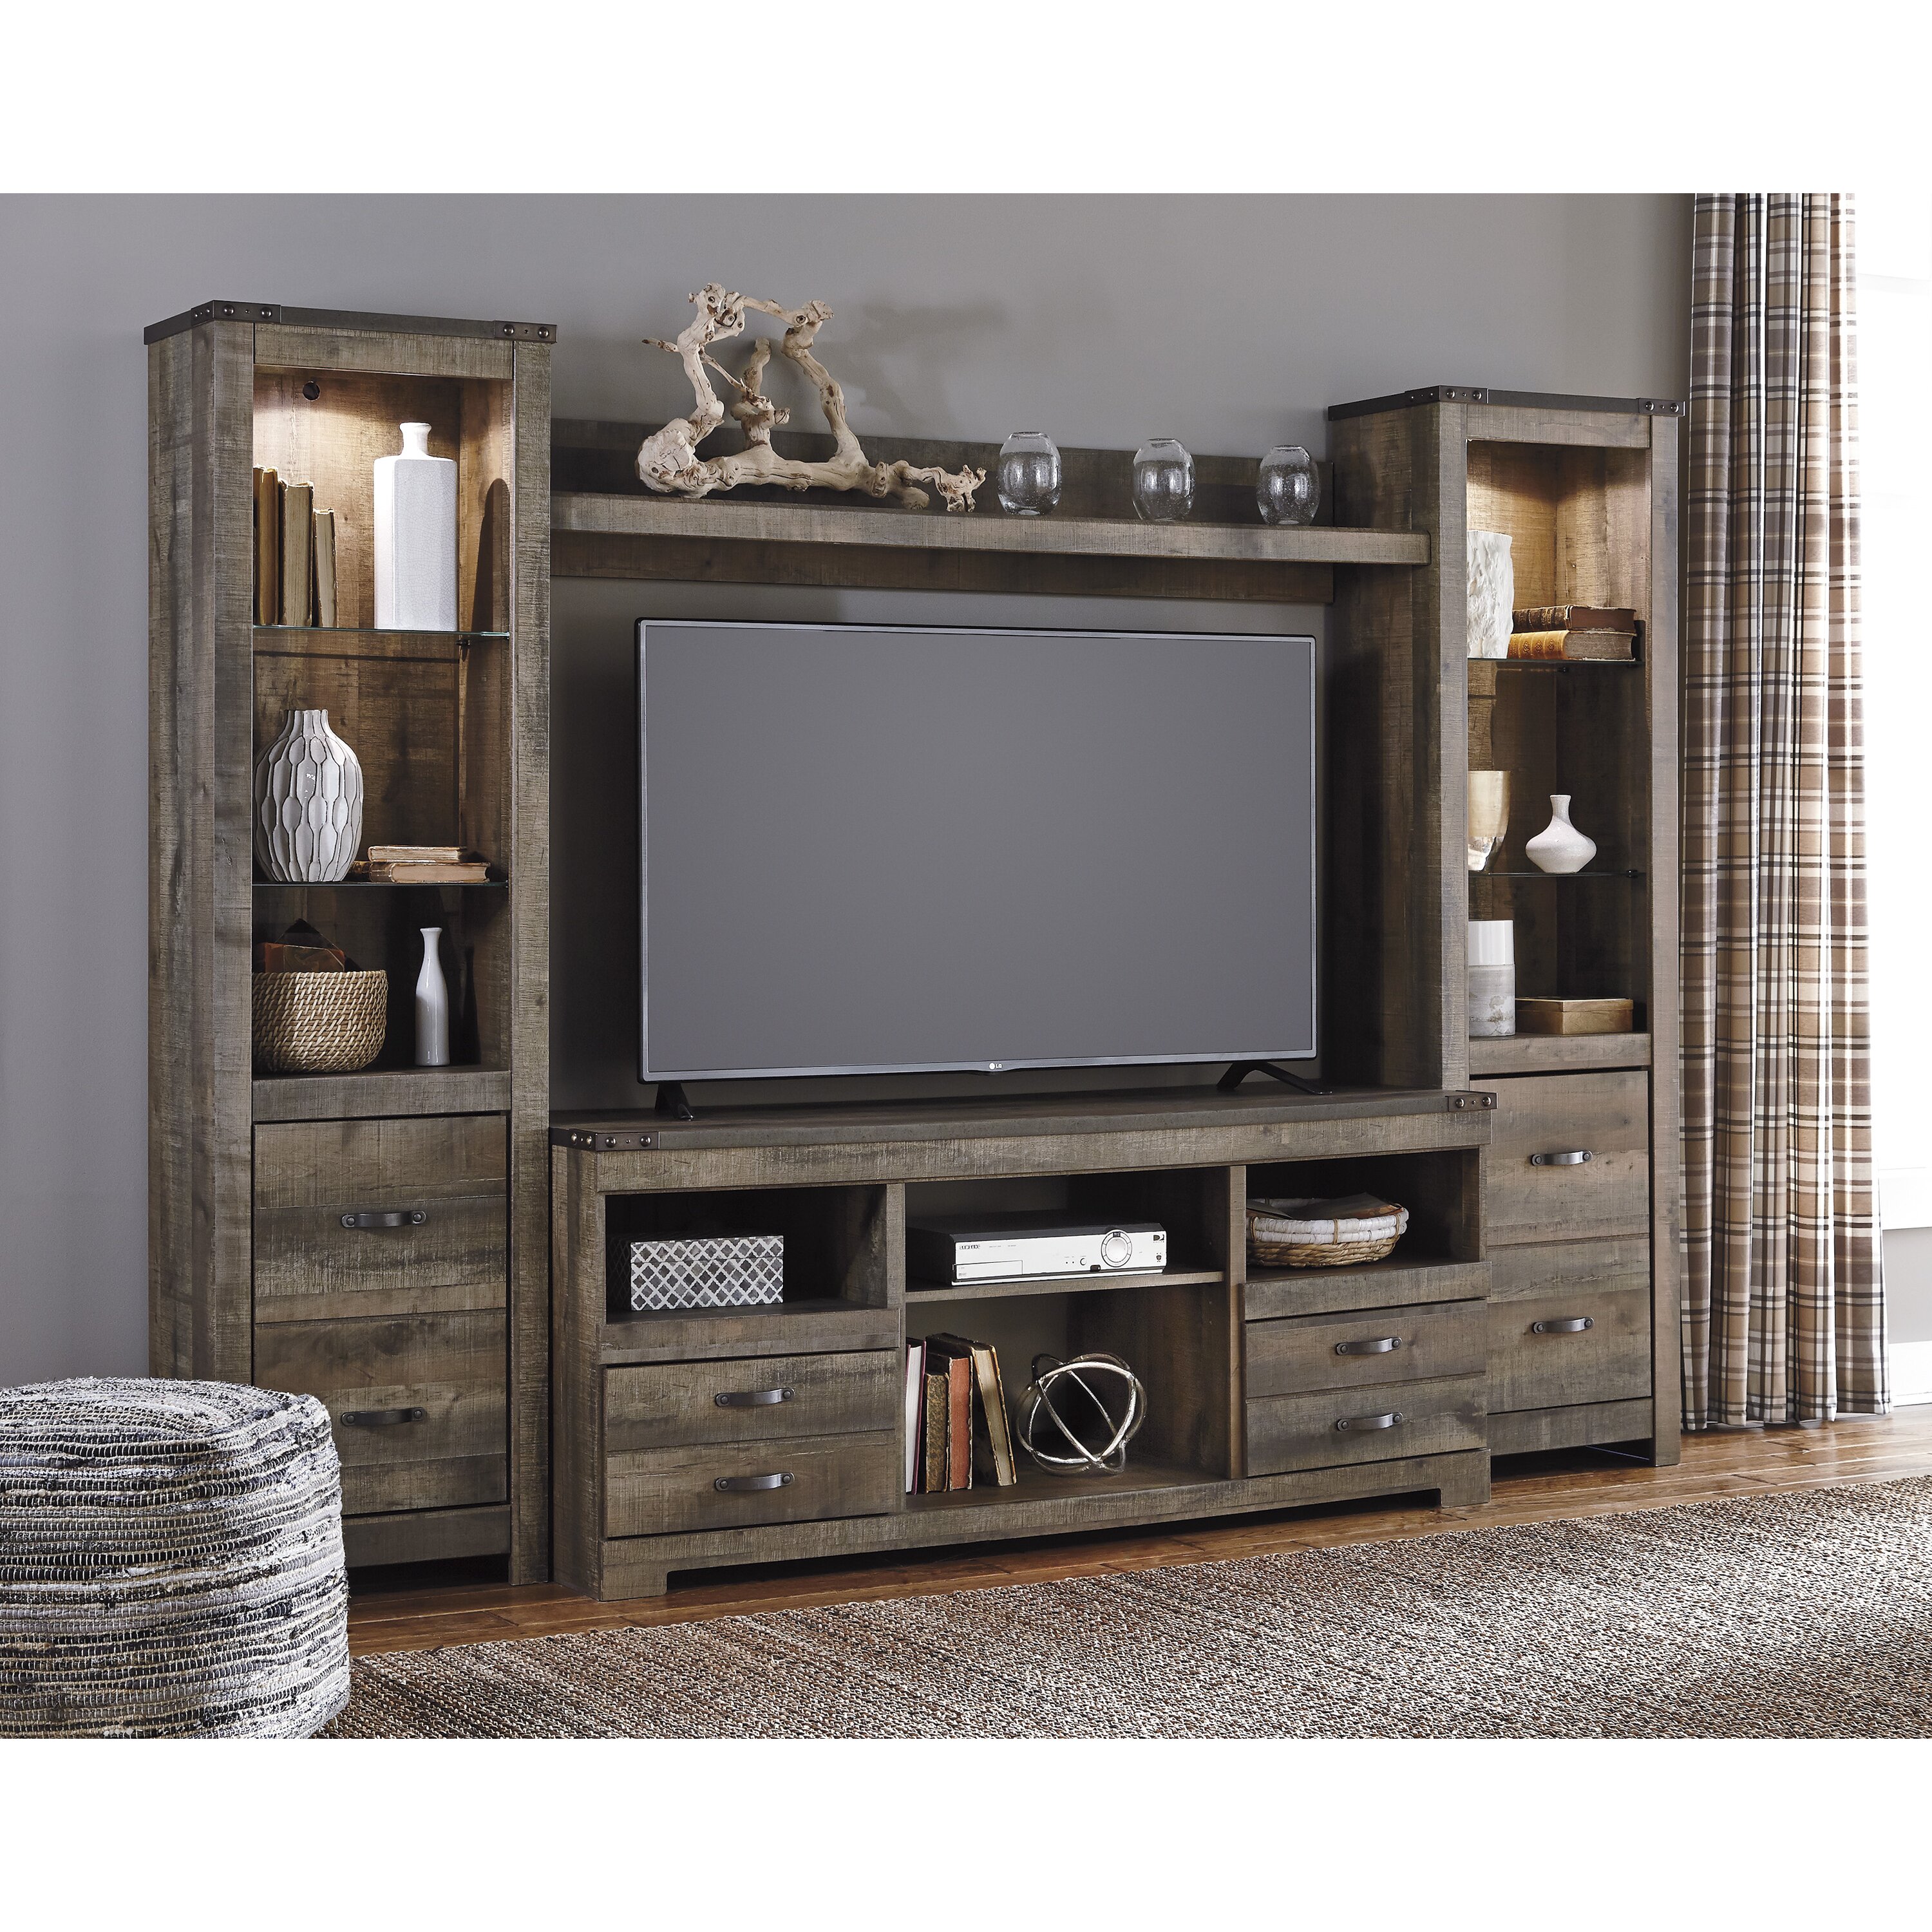 Entertainment Centers You'll Love - QUICK VIEW. Gage Entertainment Center